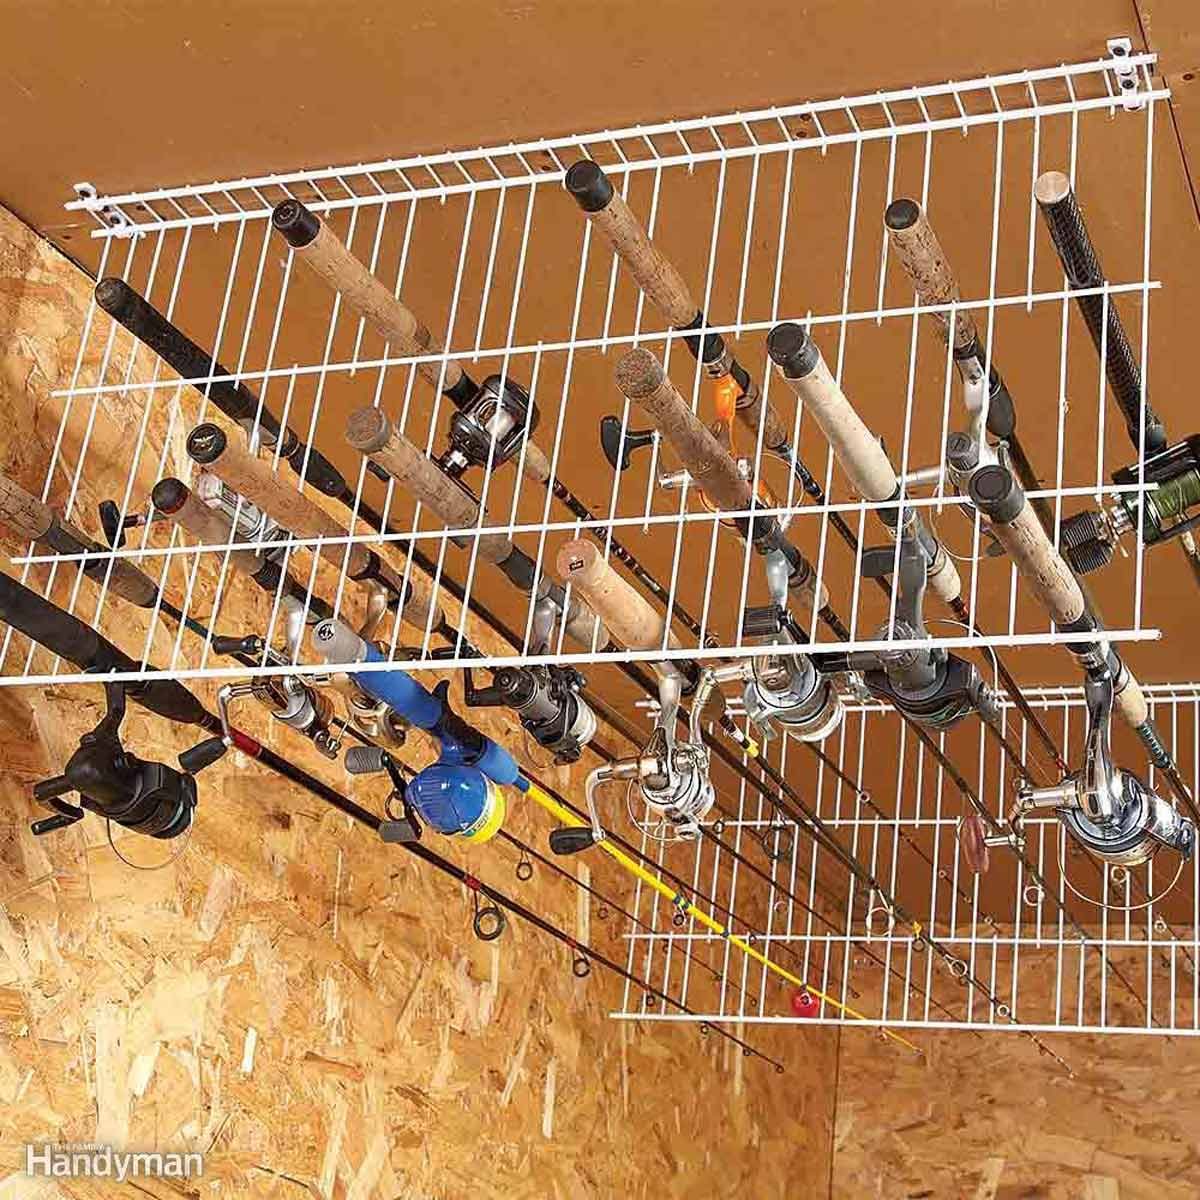 Personality-Based Storage Systems for Your Hunting and Fishing Gear